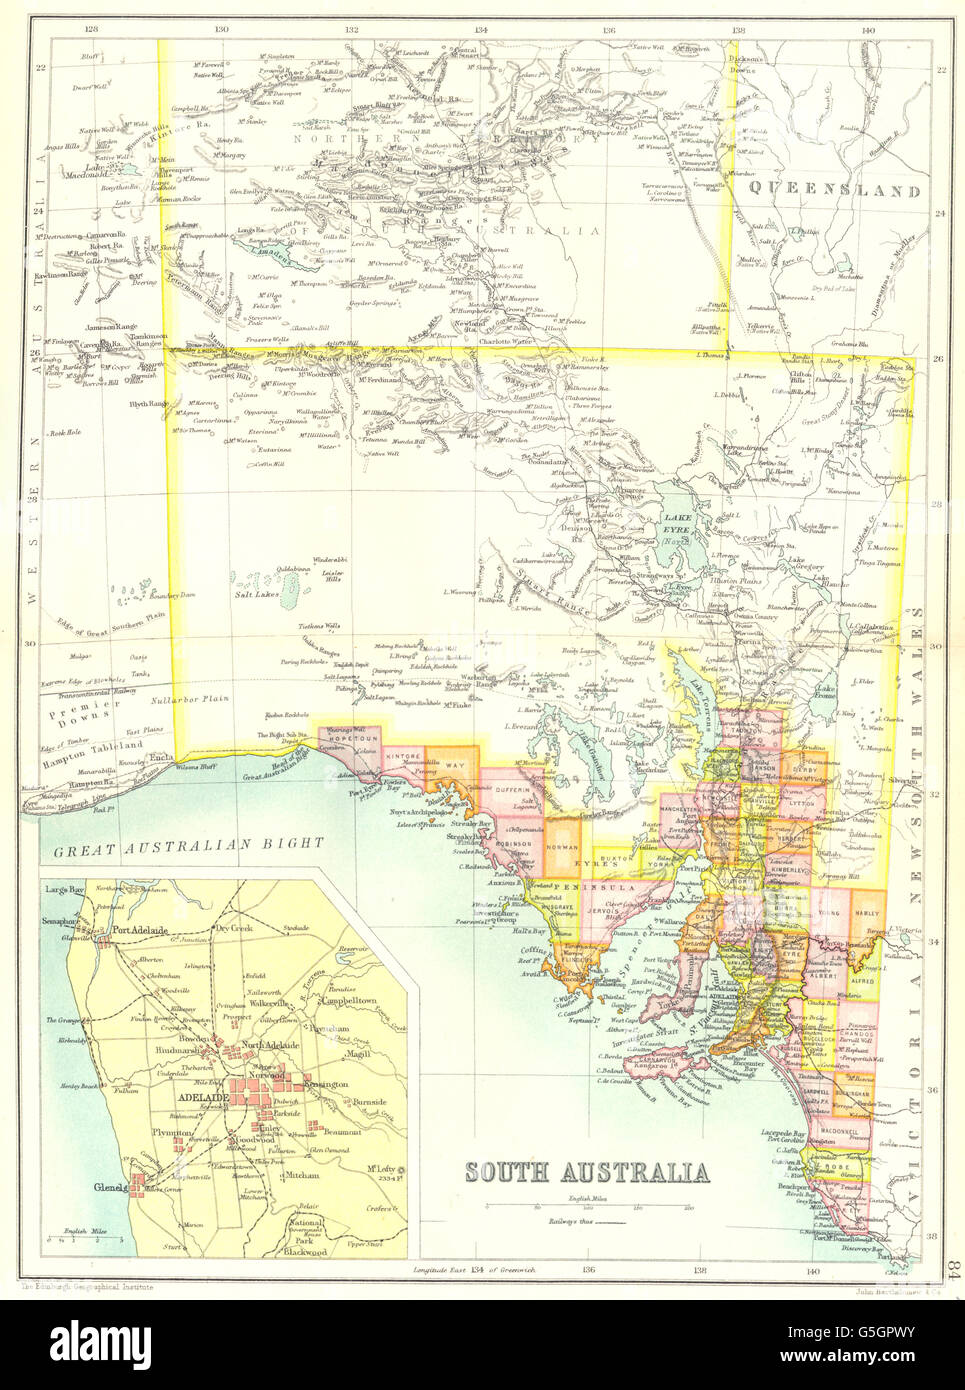 SOUTH AUSTRALIA: State map showing counties. Inset Adelaide. Australia, 1909 Stock Photo